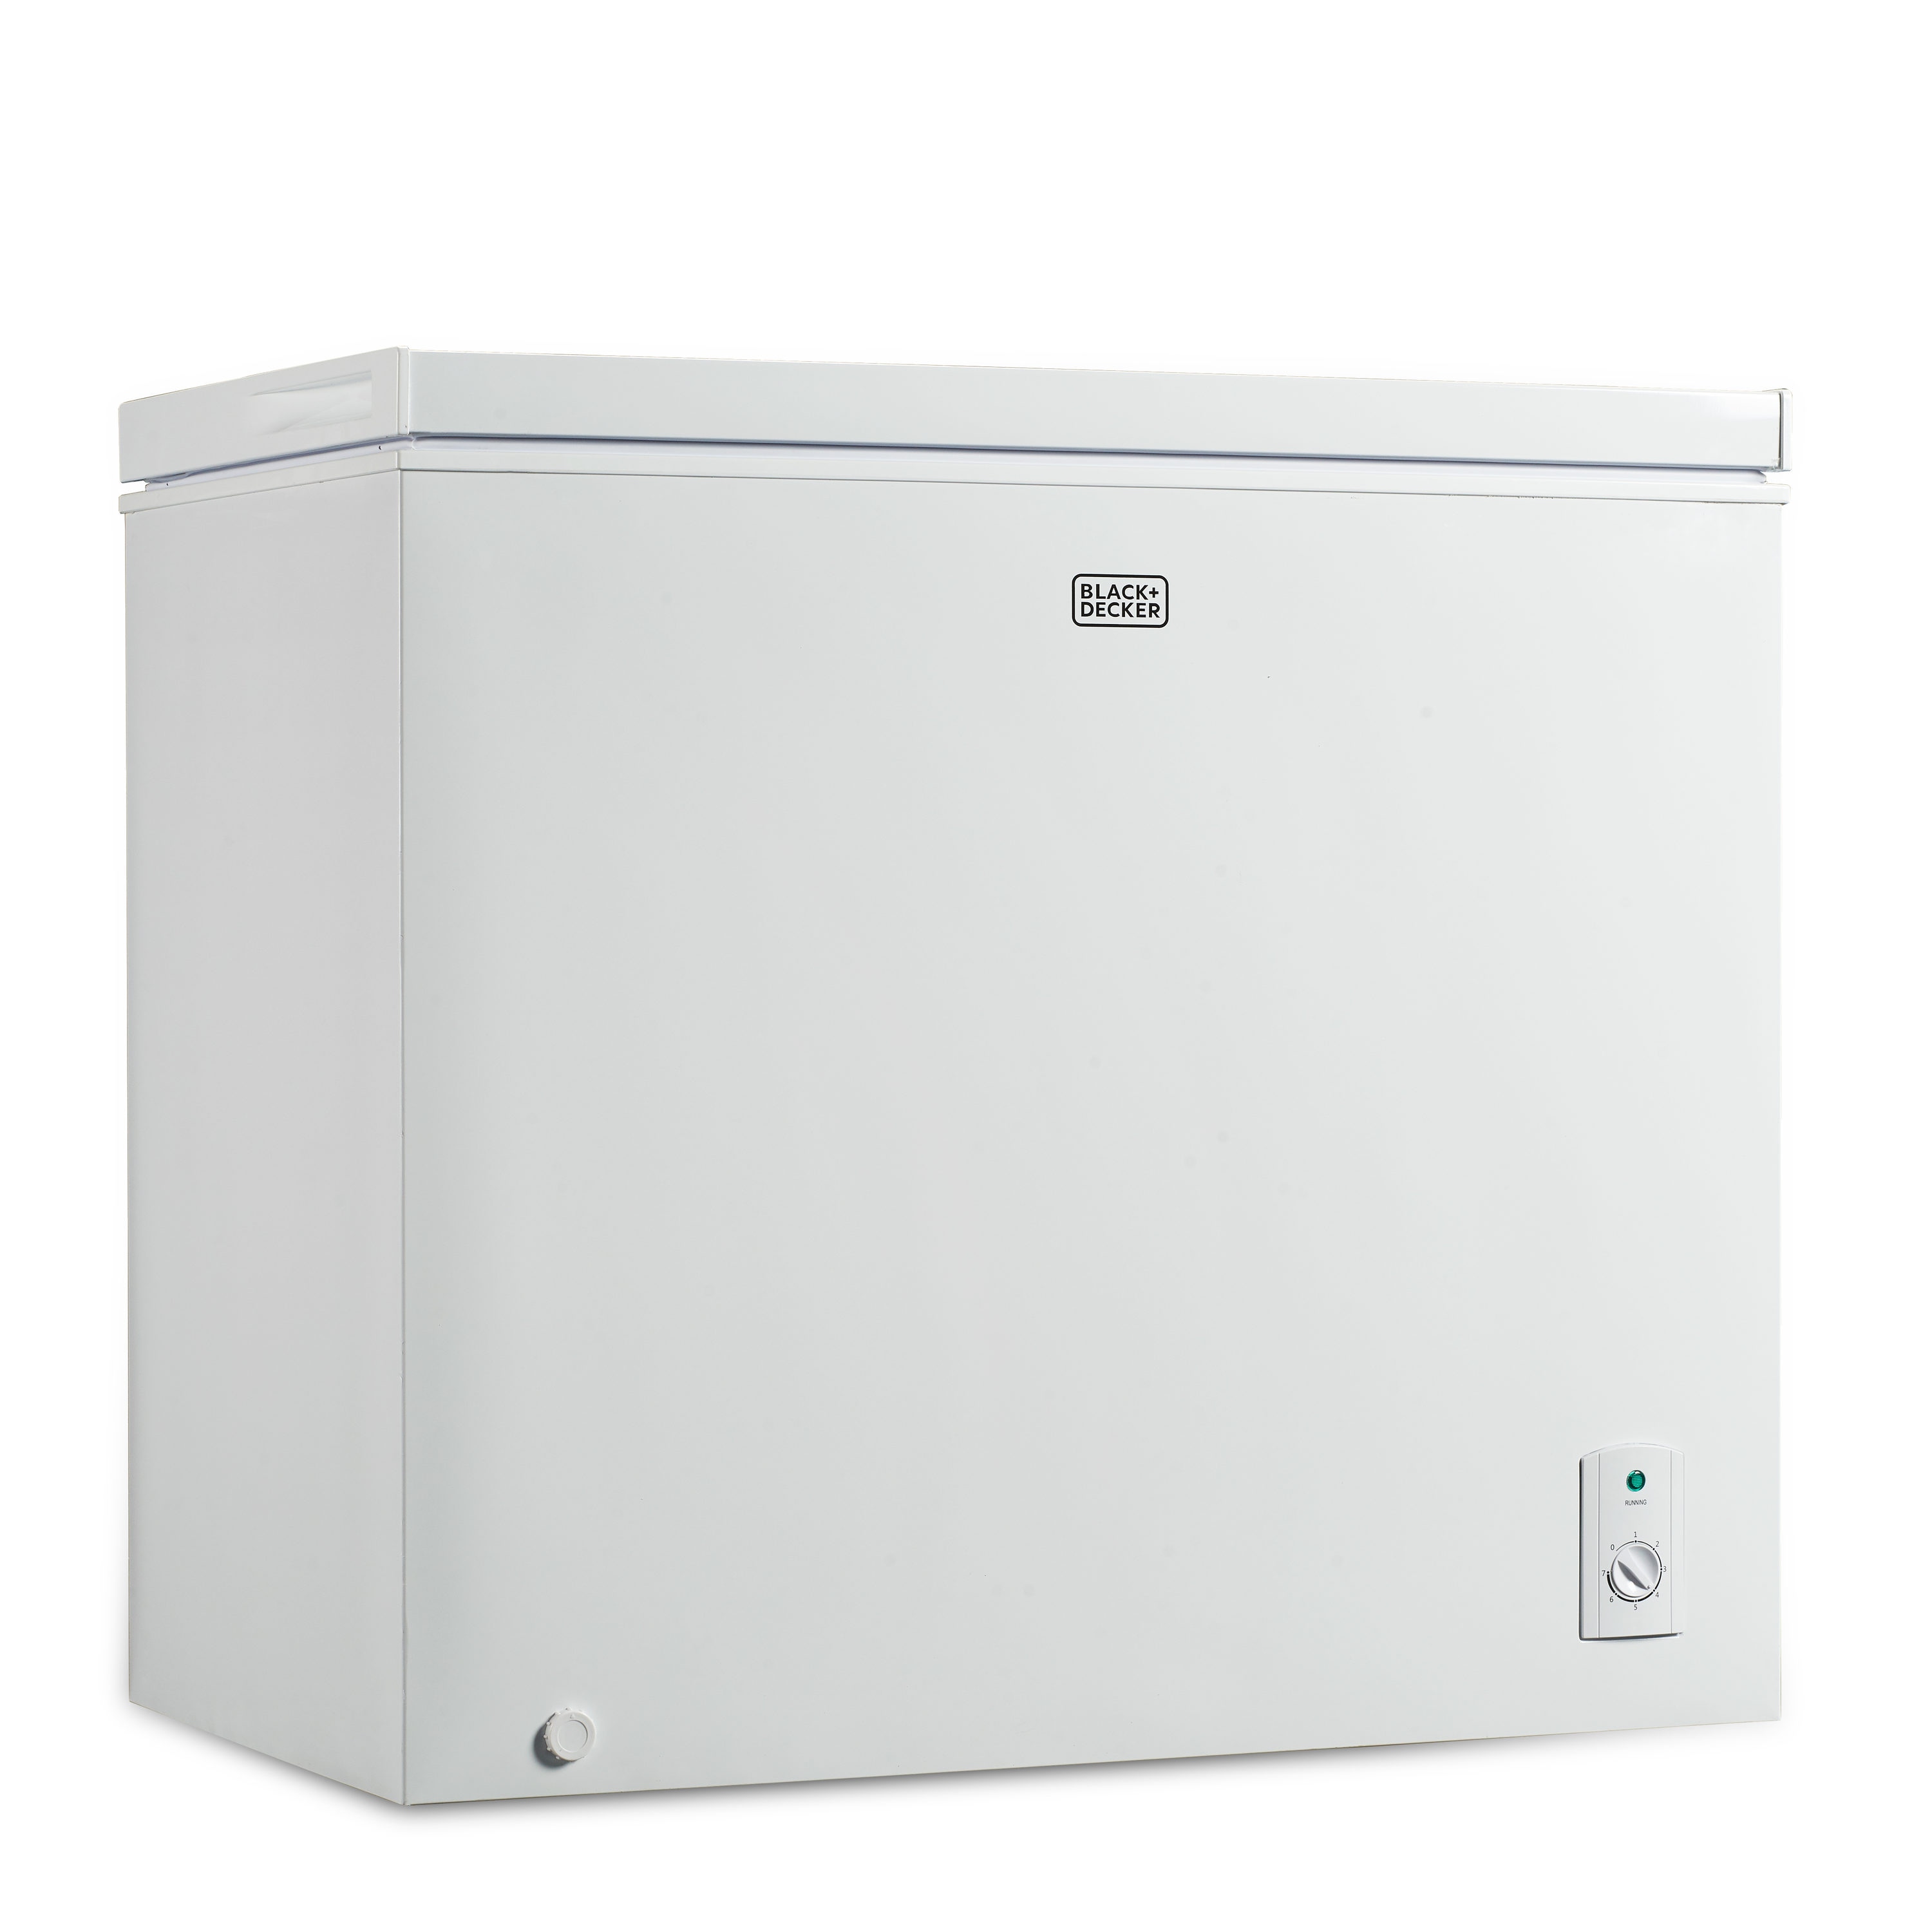 Small Chest Freezer Rental (5 Cu. Ft.), Store Premium Bagged Ice